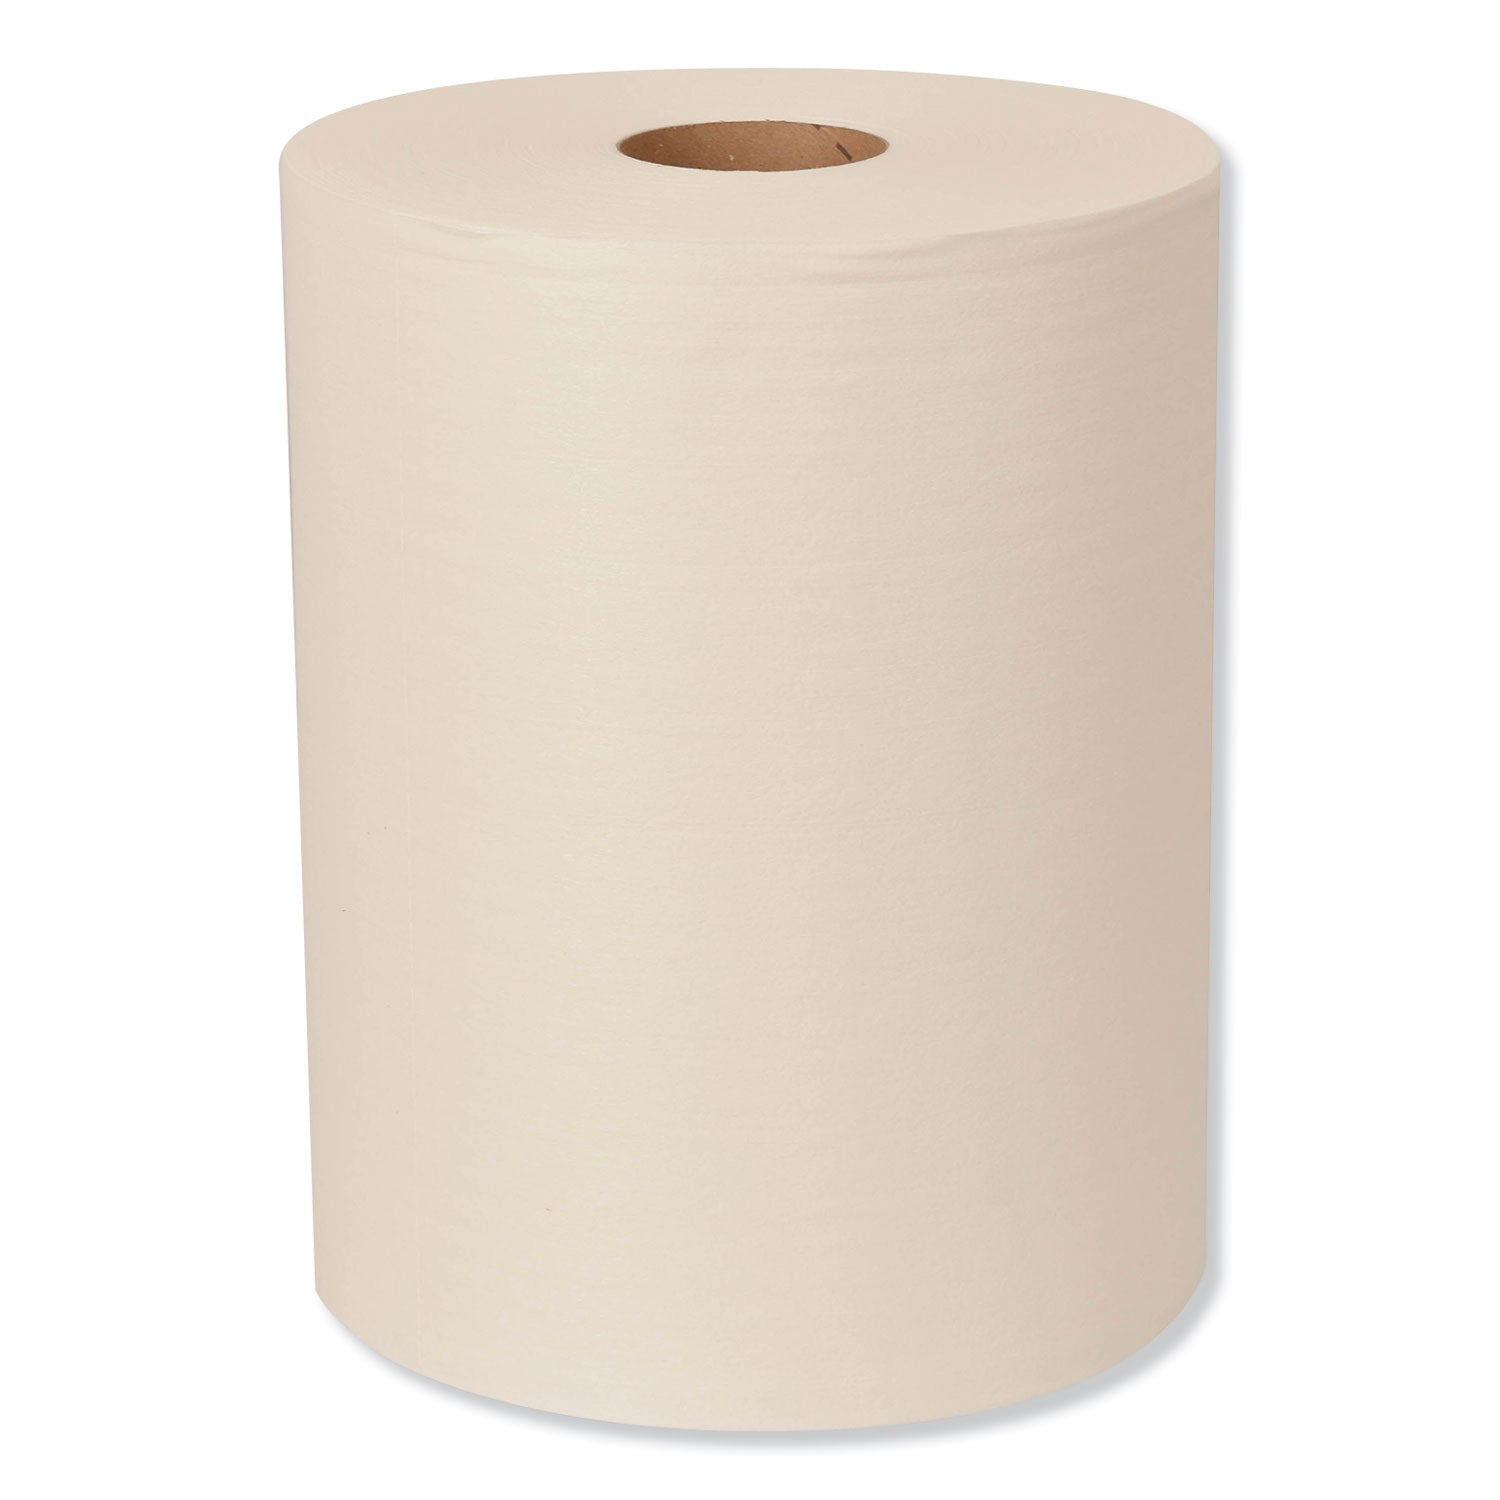 cleaning-cloth-126-x-10-white-500-wipes-carton_trk510137 - 5